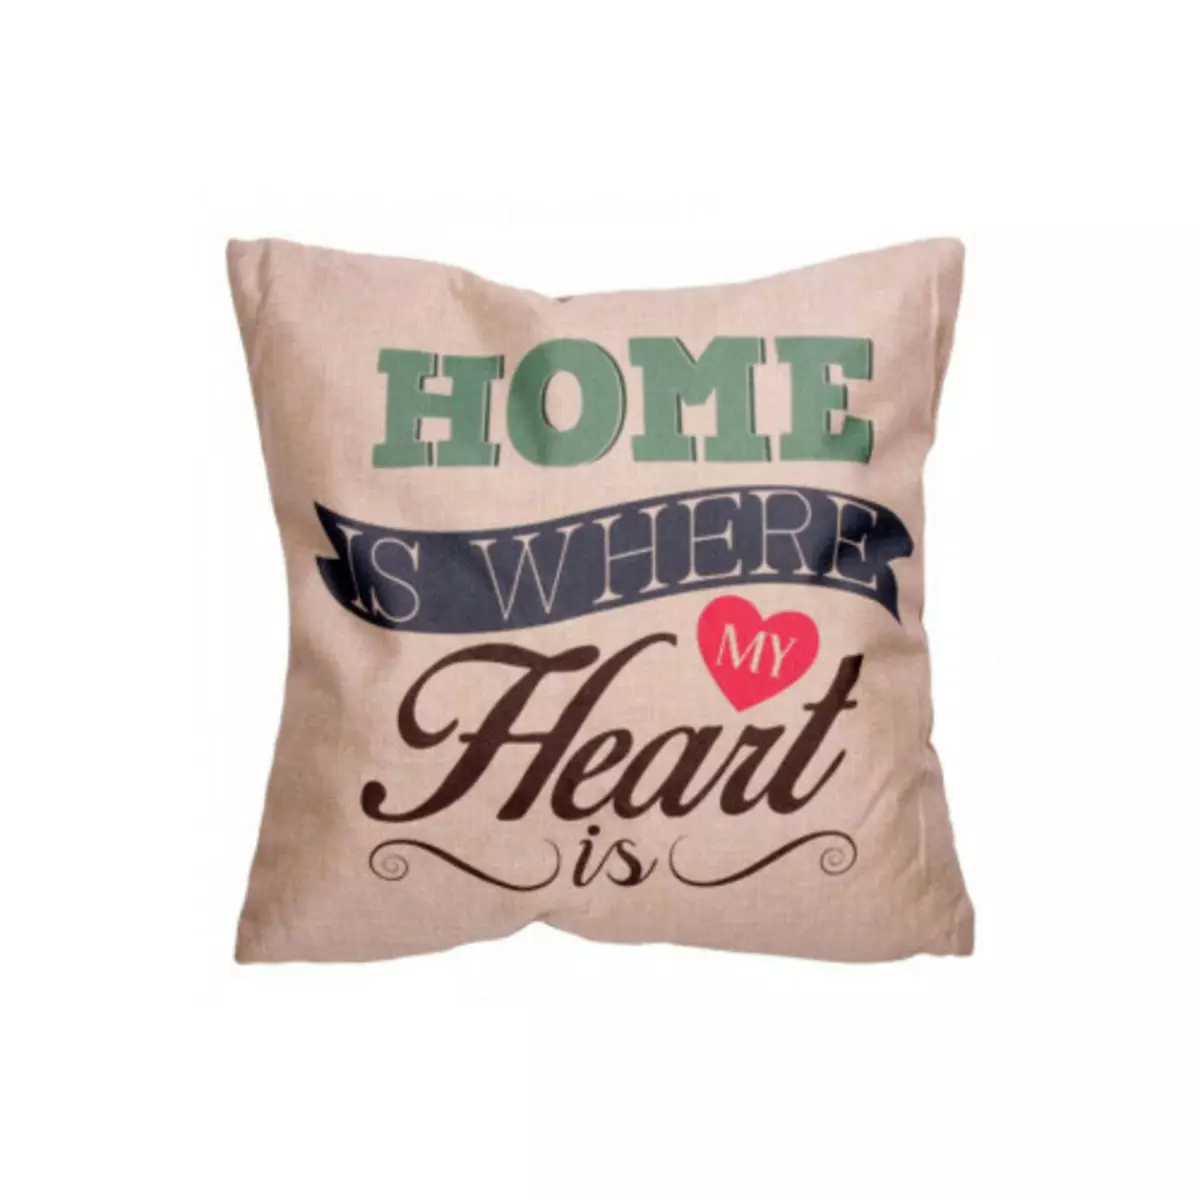 Magnetic land Coussin tendance déco  Home is where my Heart is  (43 x 43 cm)